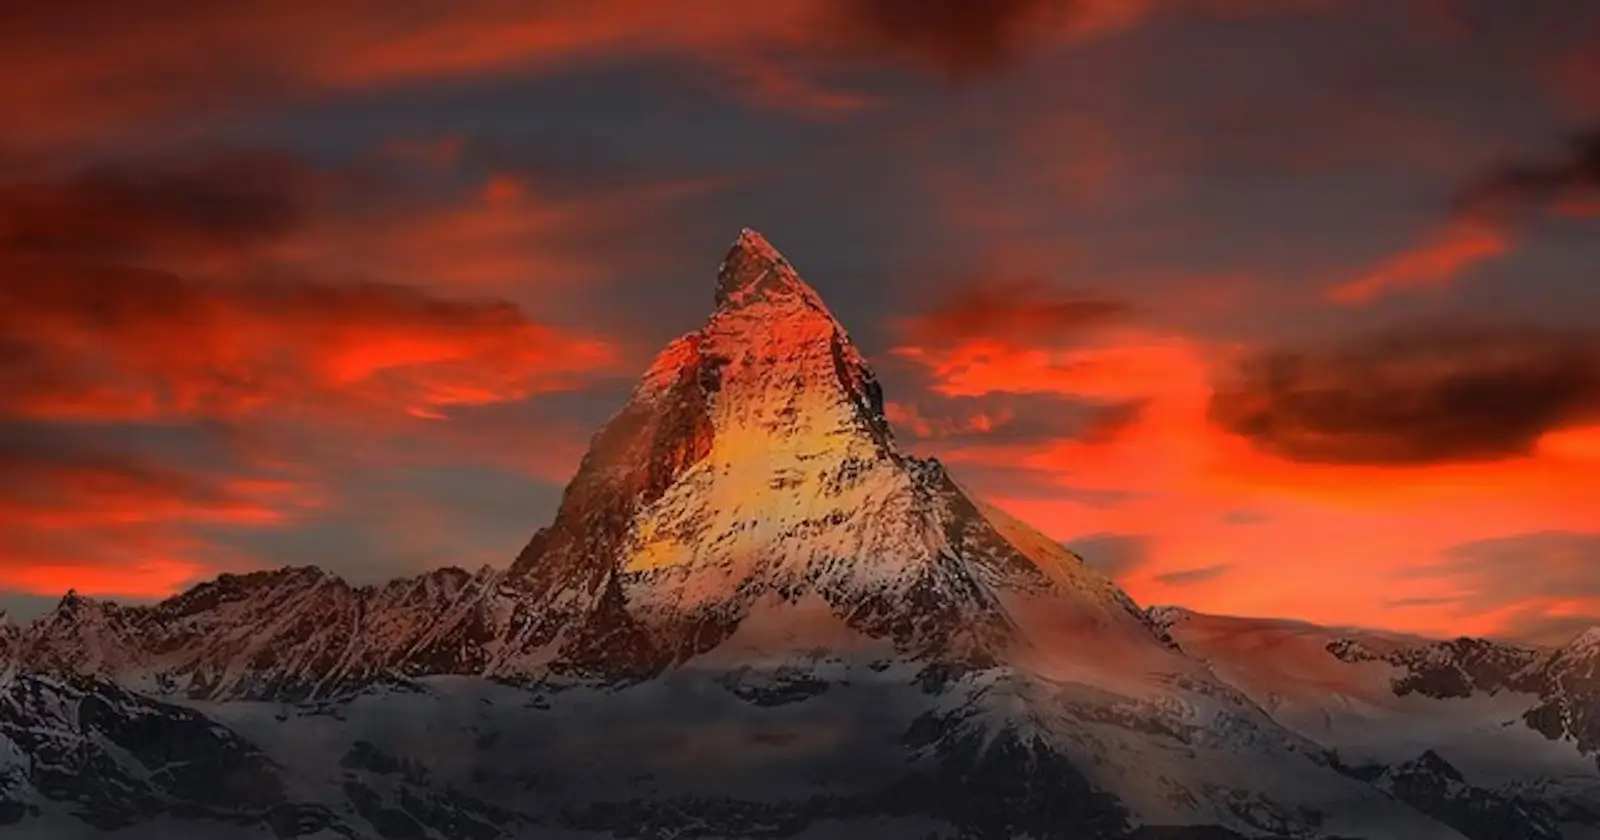 Scenic view of a mountain against a red sky with orange clouds, evoking the essence of a poem Born to Live.